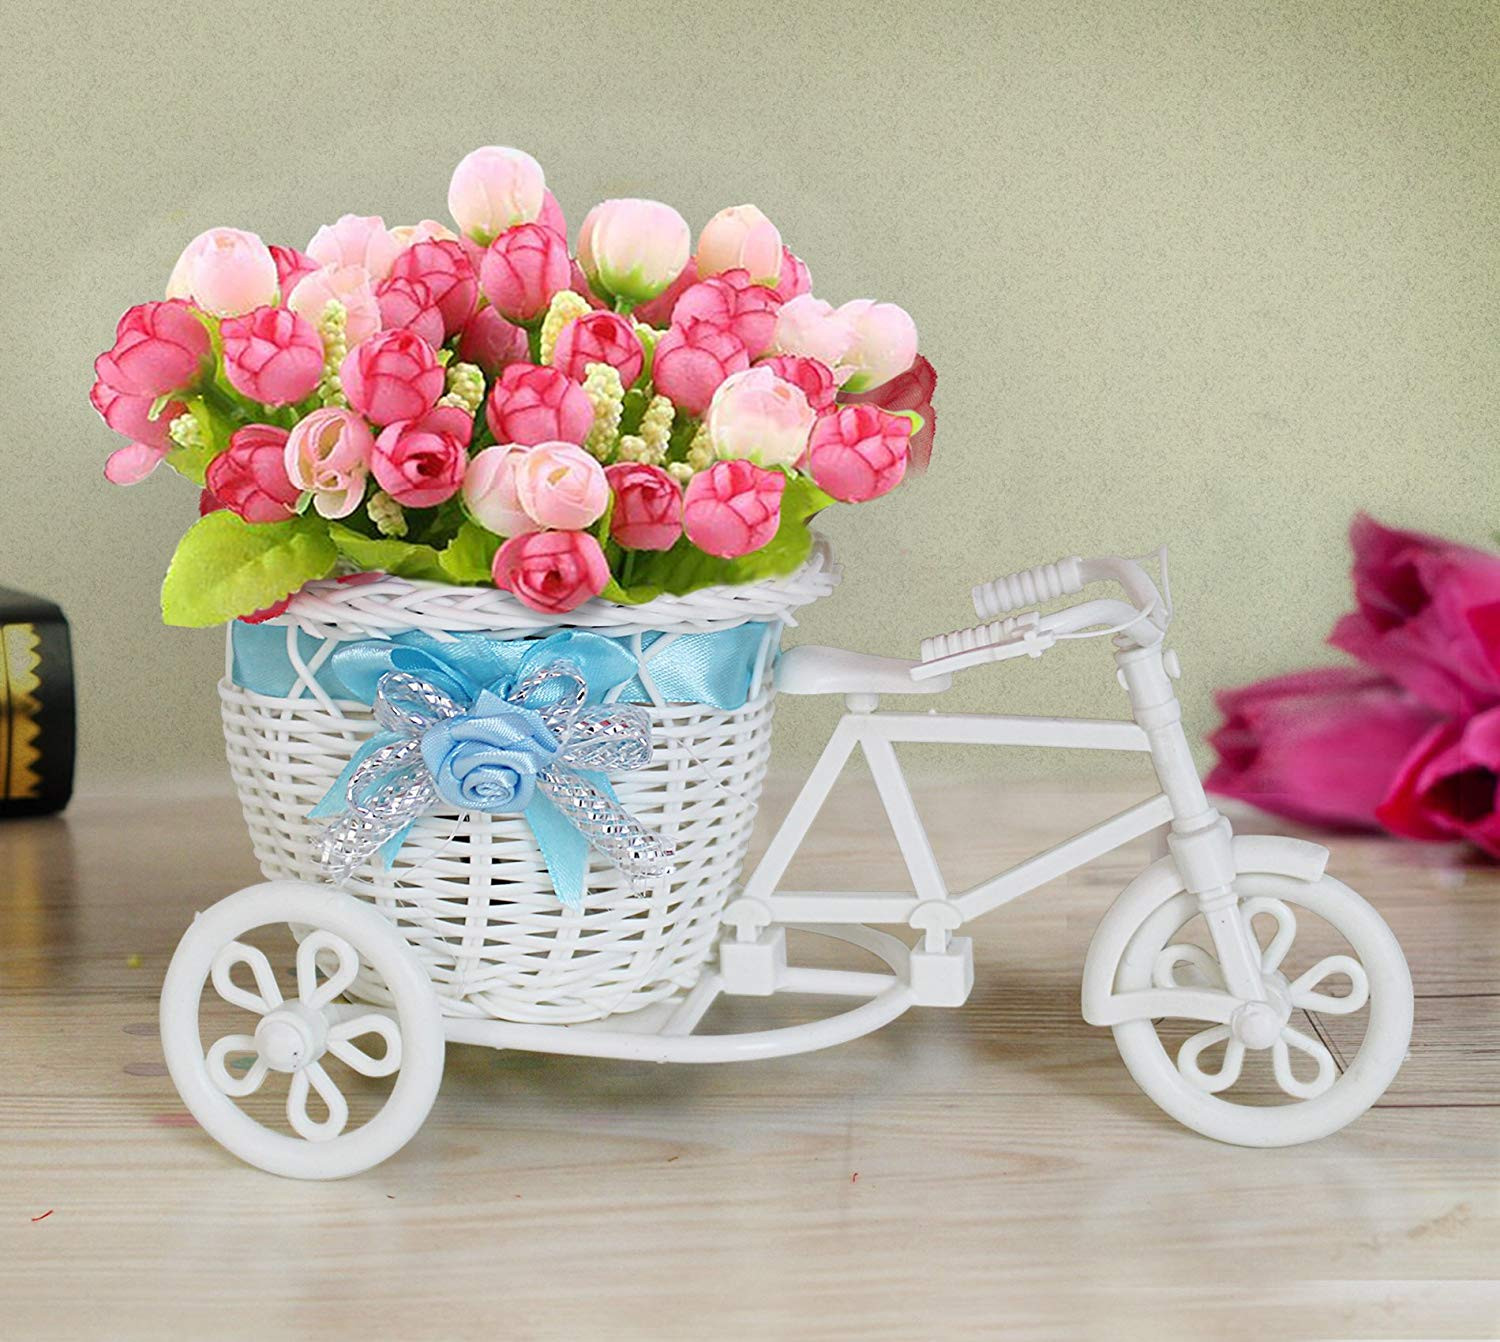 18 Fashionable Paperwhite Bulb Vase 2024 free download paperwhite bulb vase of buy tied ribbons cycle shape plastic flower vase with peonies pertaining to buy tied ribbons cycle shape plastic flower vase with peonies bunches 10 01 cm x 11 99 cm 